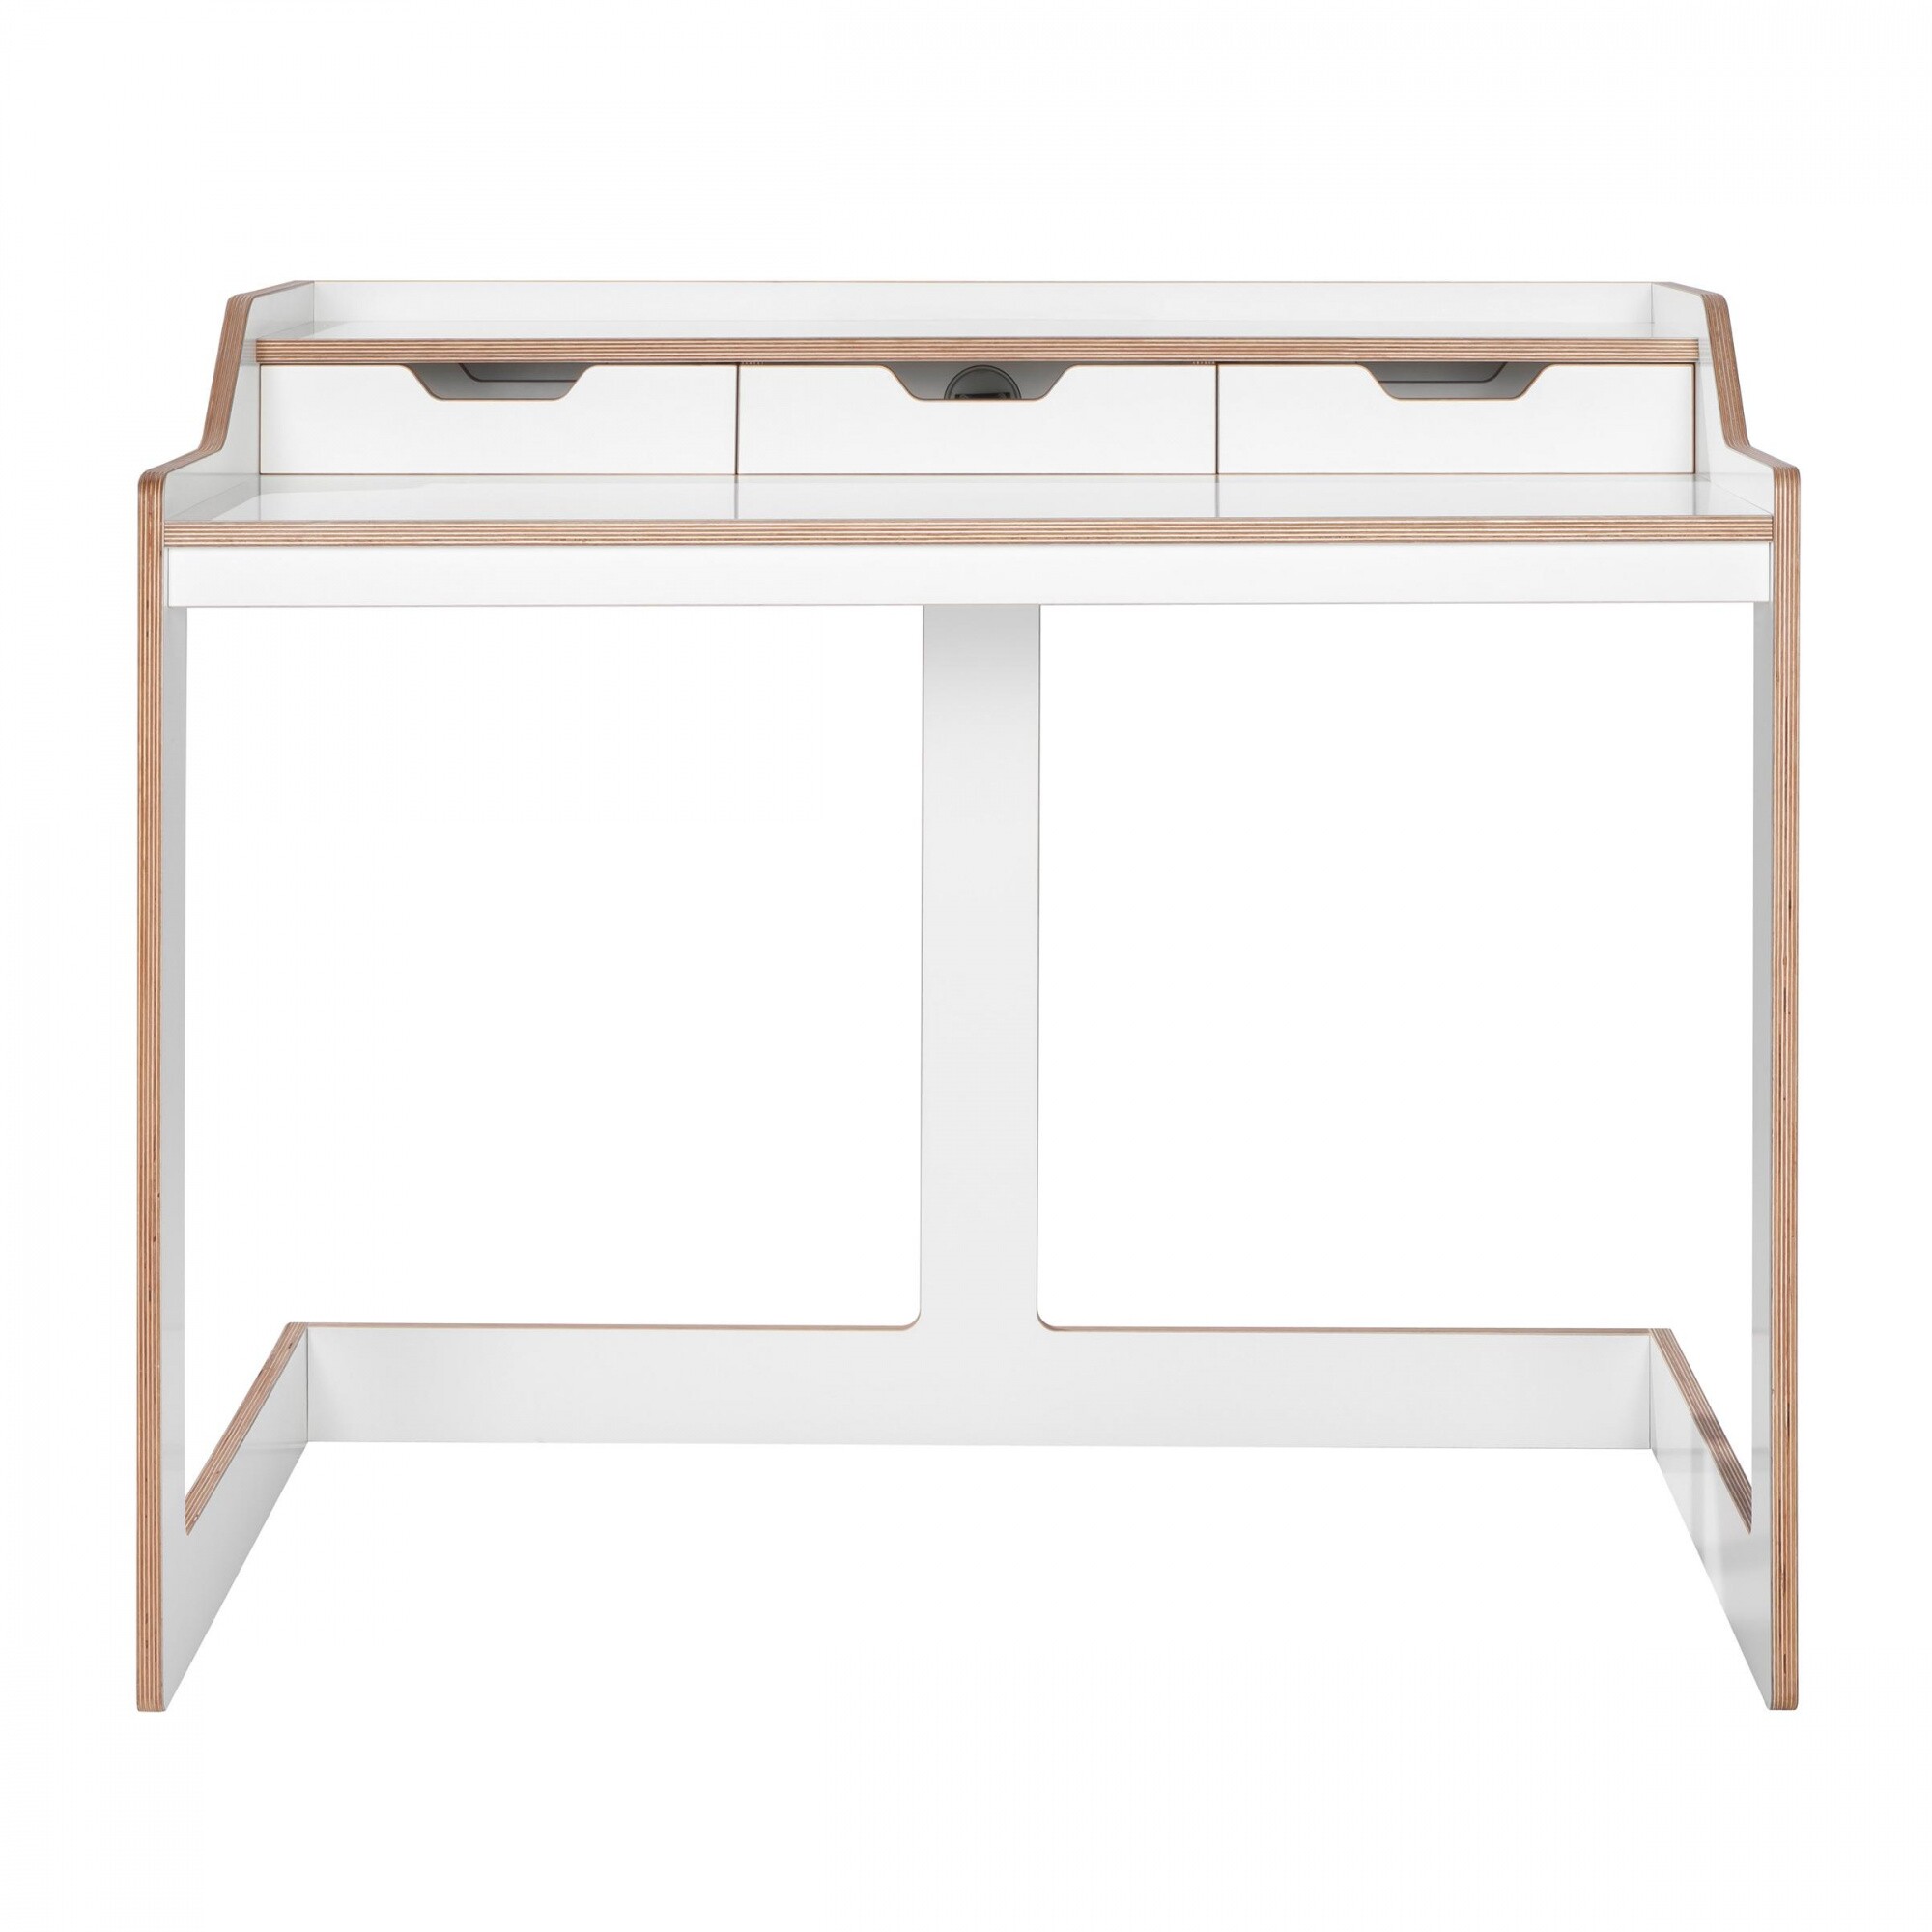 Muller Small Living Plane Desk Top 106x70x86cm Ambientedirect